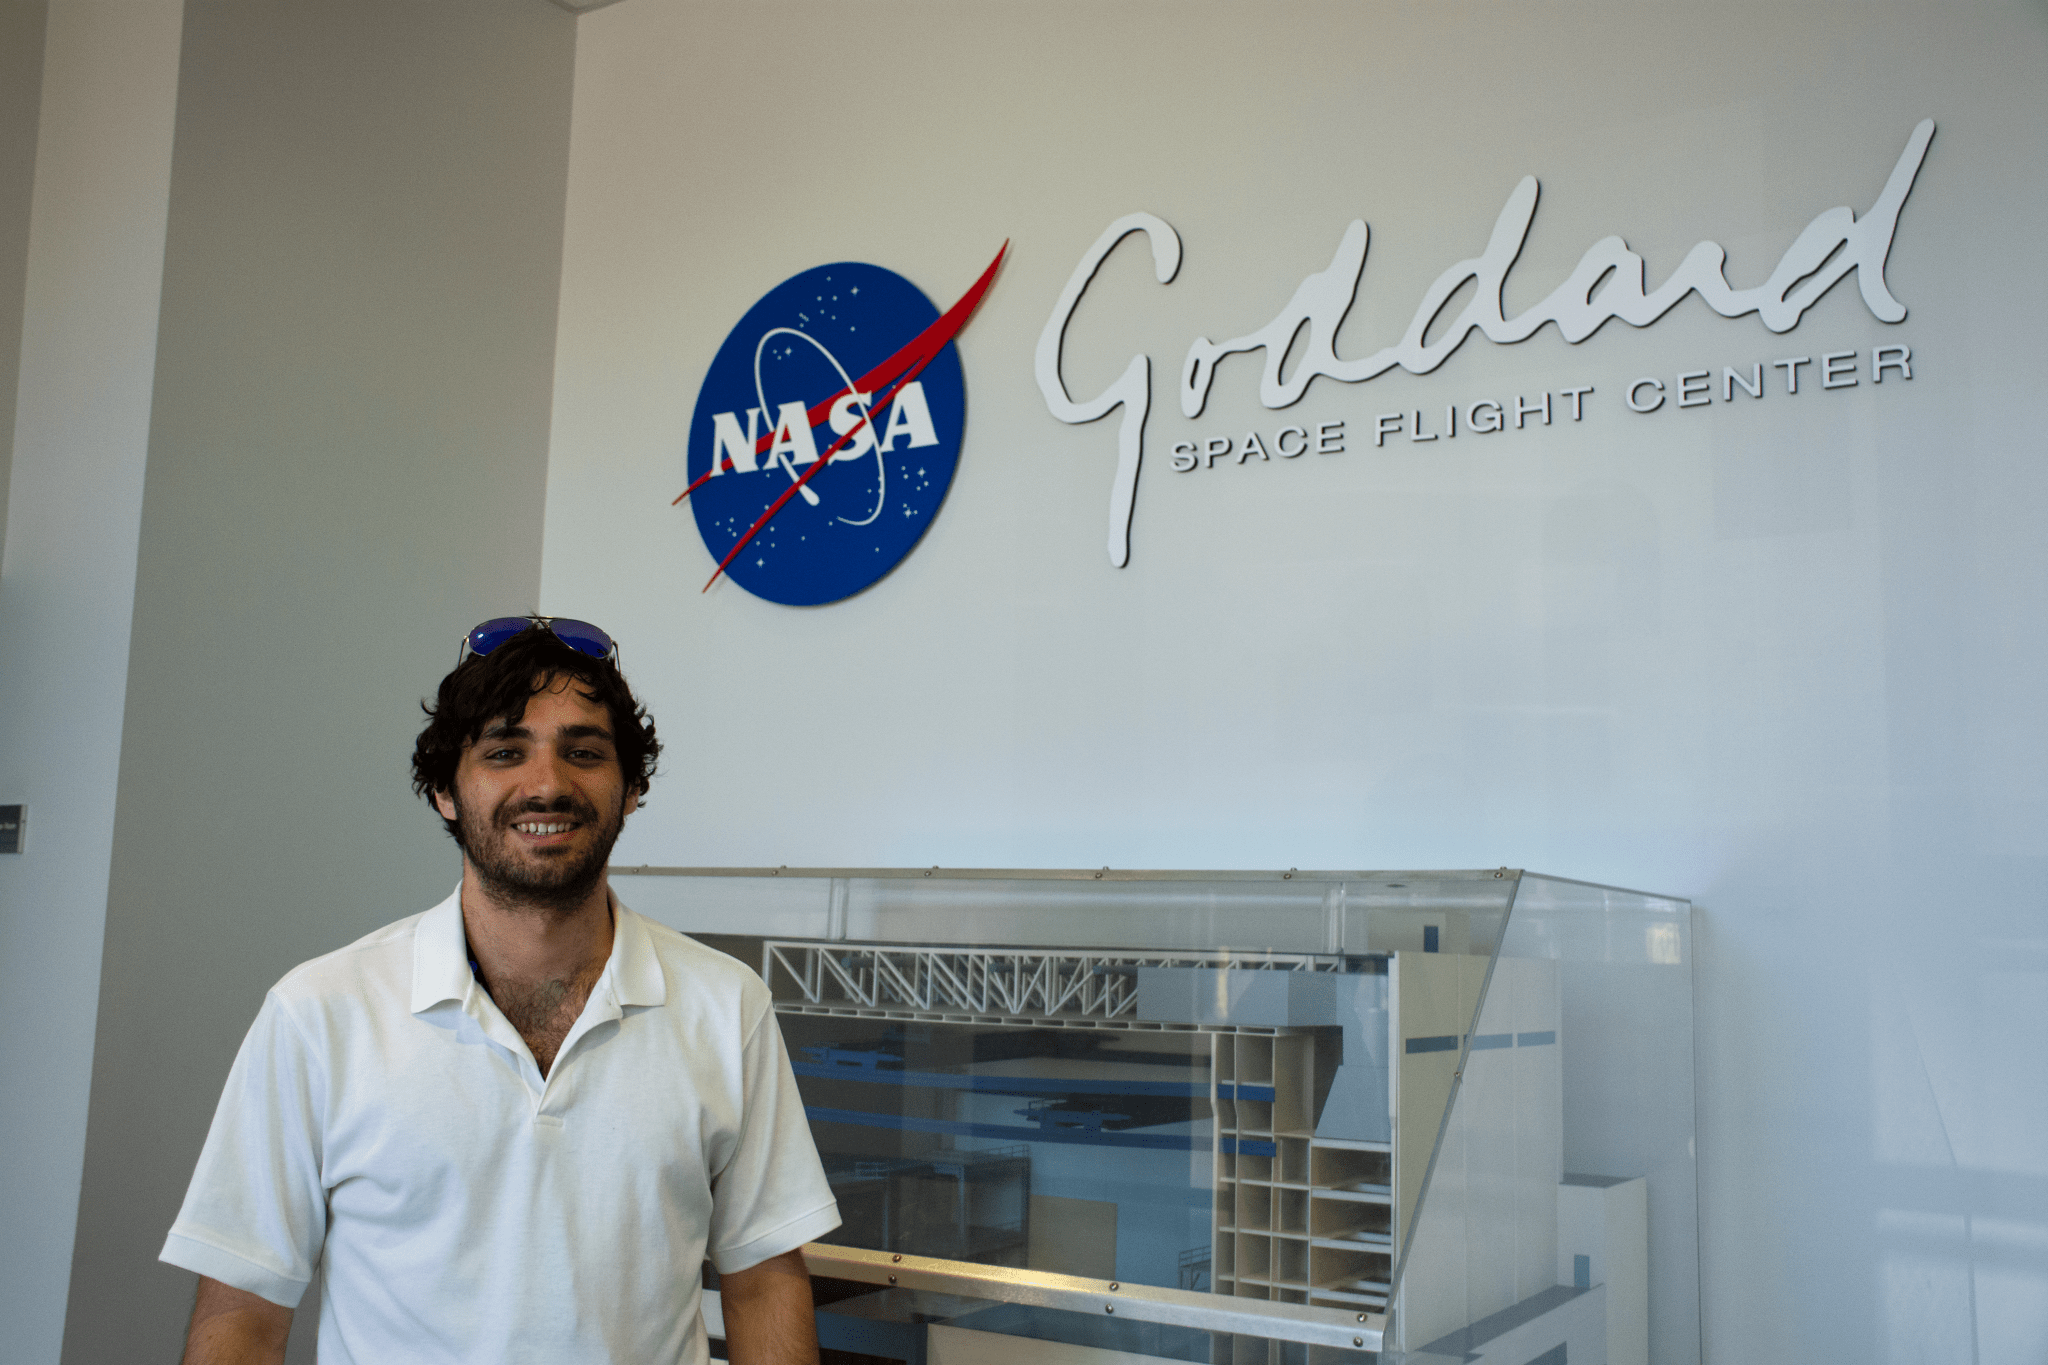 Man with black, curly hair wearing a white polo stands in front of a wall with the NASA Goddard logo.